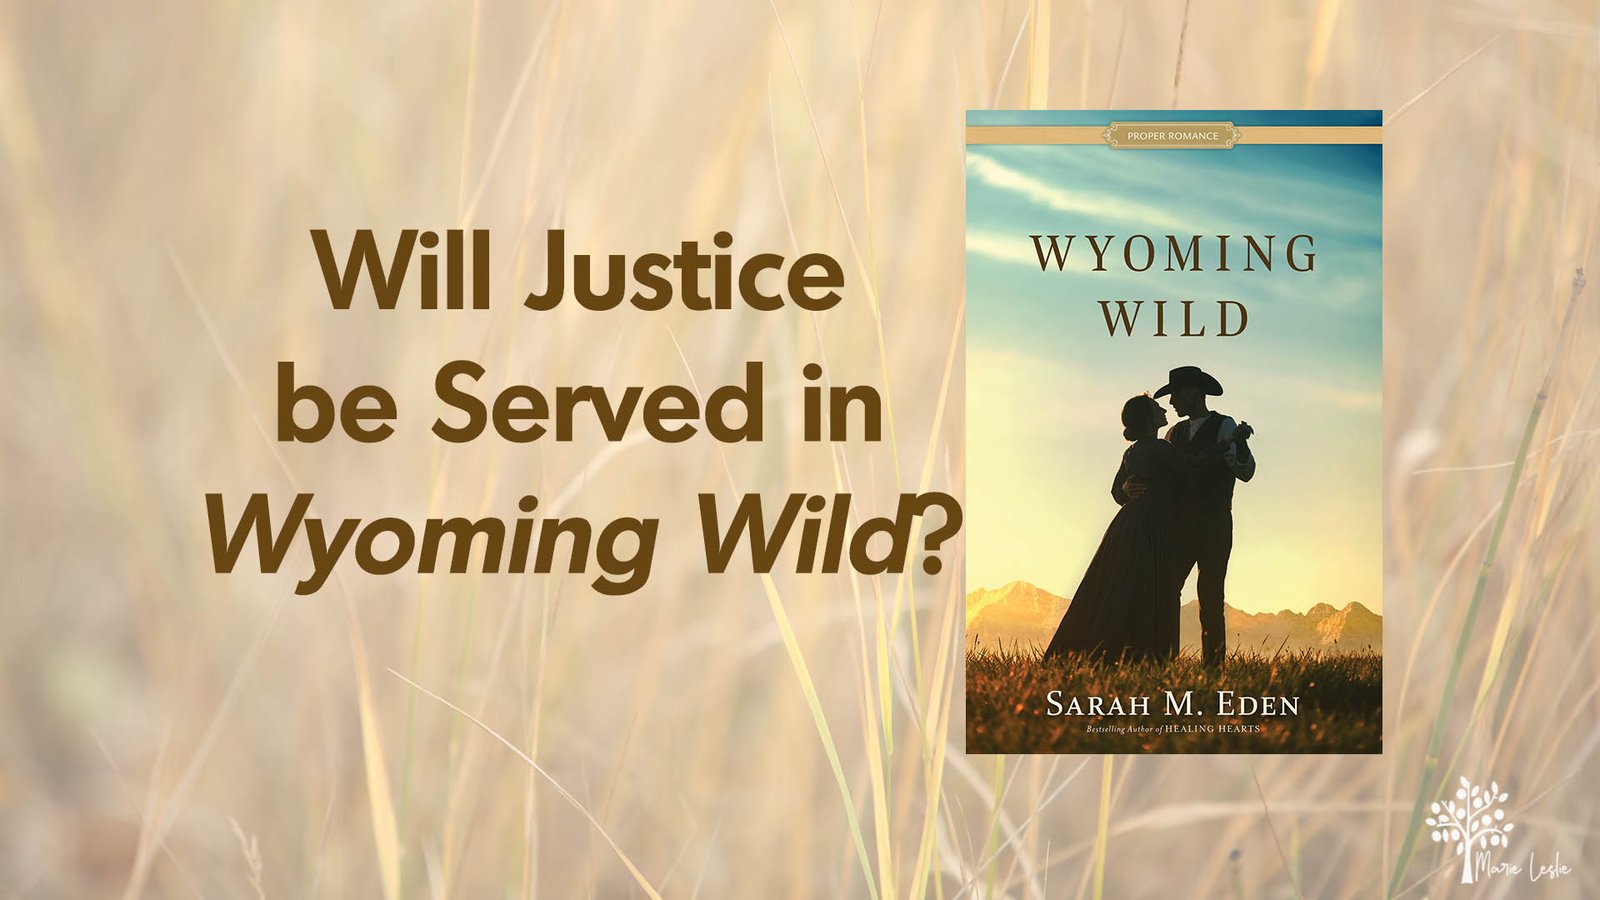 Will Justice be Served in “Wyoming Wild”?